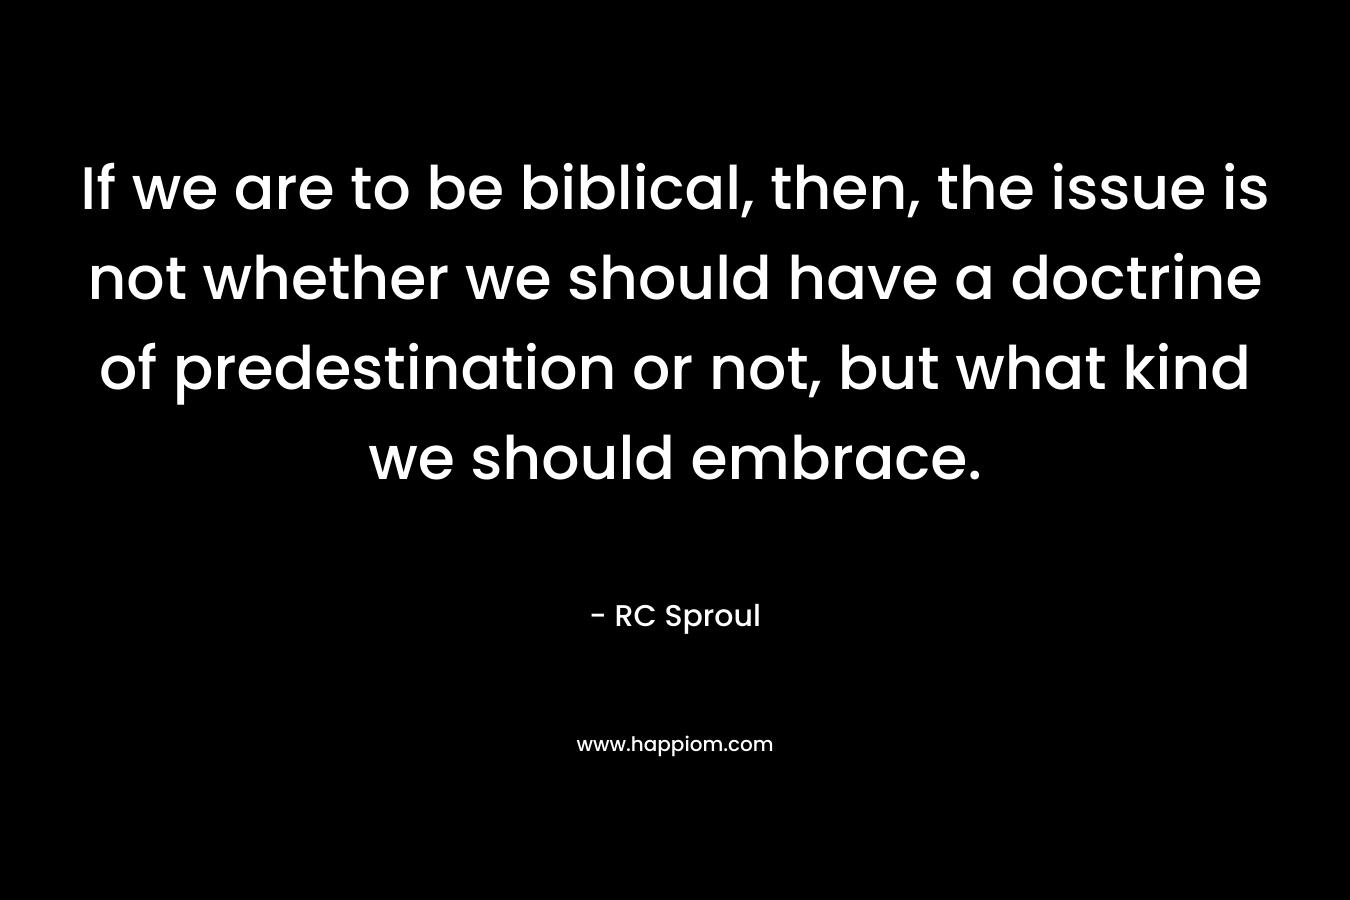 If we are to be biblical, then, the issue is not whether we should have a doctrine of predestination or not, but what kind we should embrace. – RC Sproul